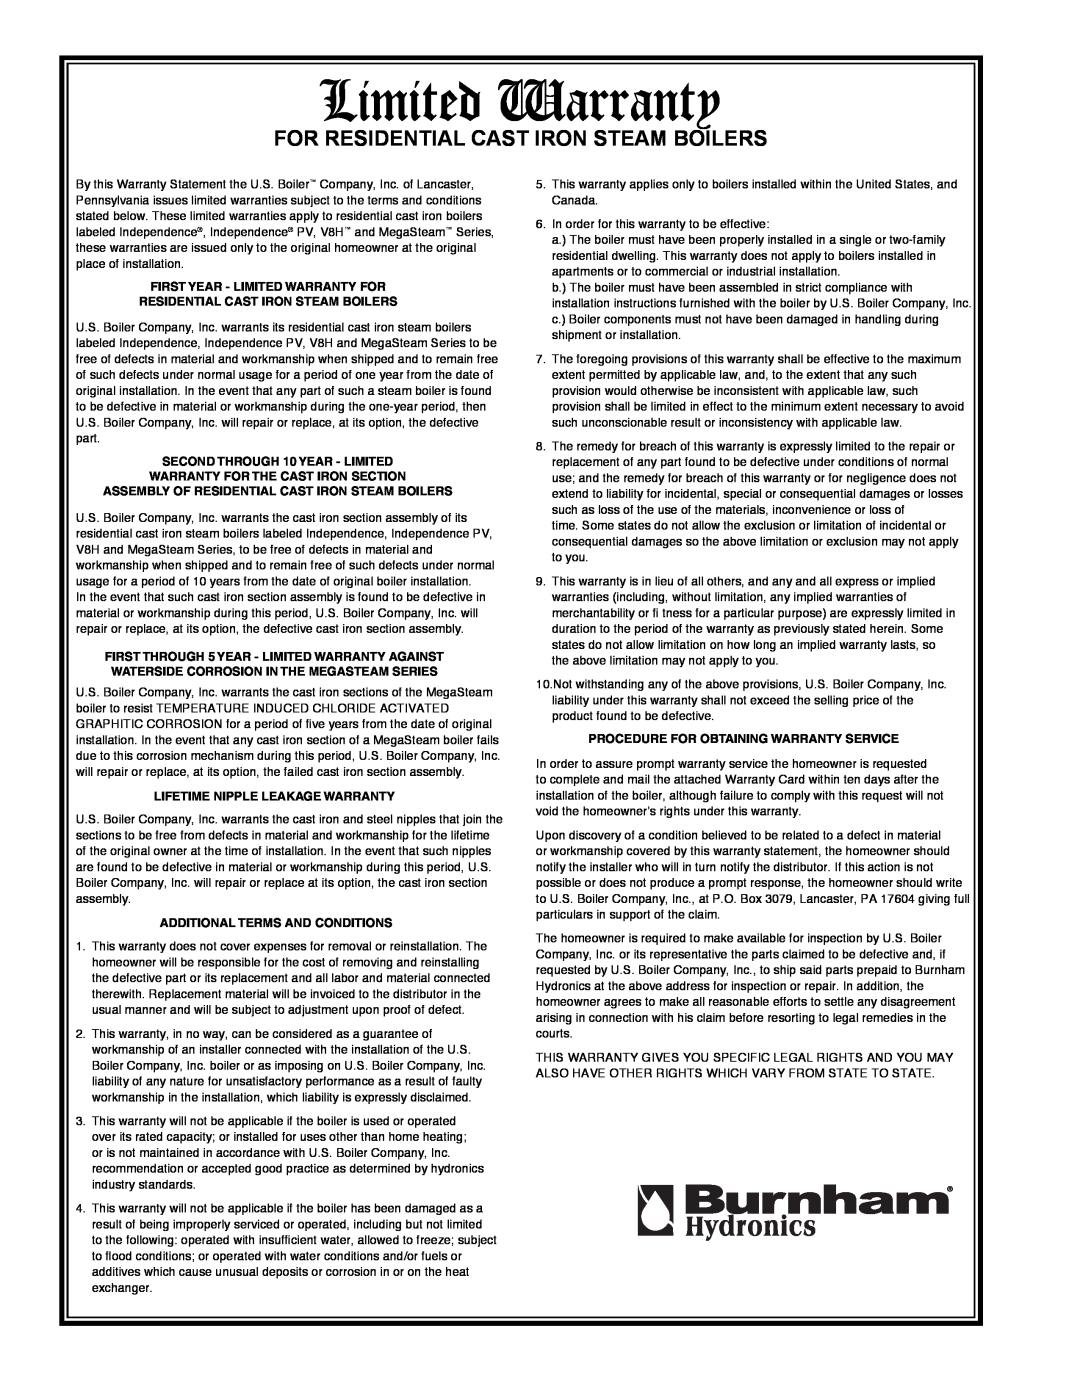 Burnham MST288 For Residential Cast Iron Steam Boilers, Limited Warranty, Assembly Of Residential Cast Iron Steam Boilers 